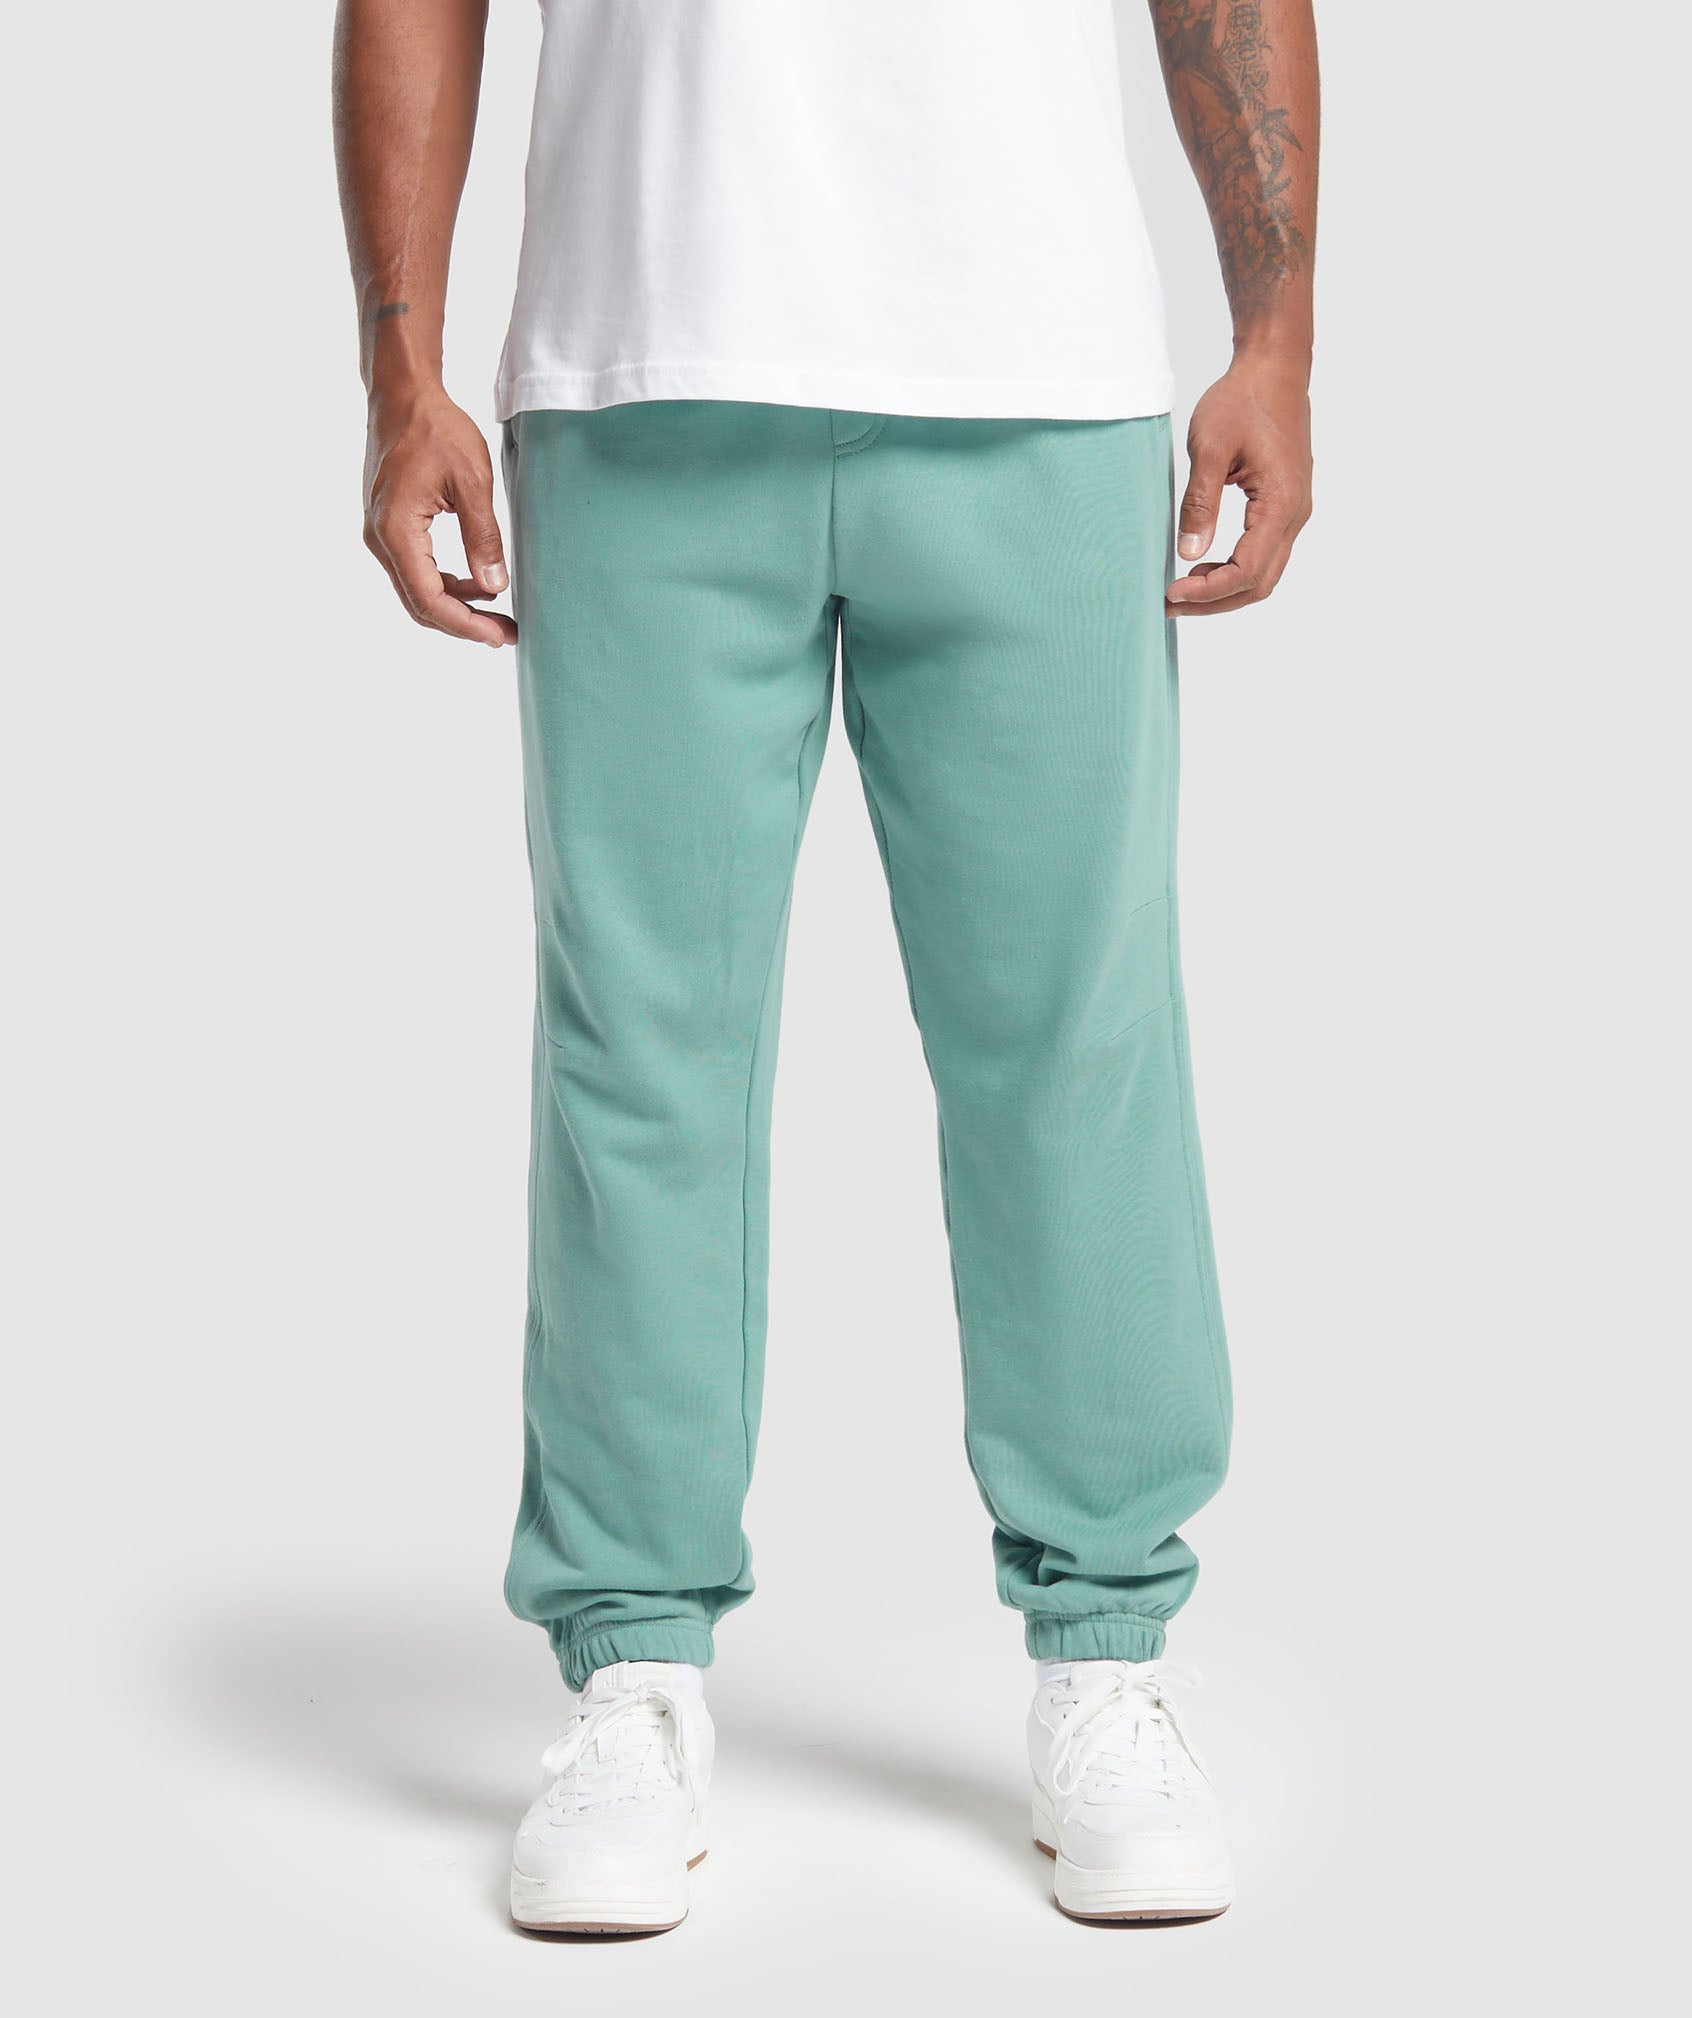 Rest Day Essentials Joggers in Duck Egg Blue - view 1